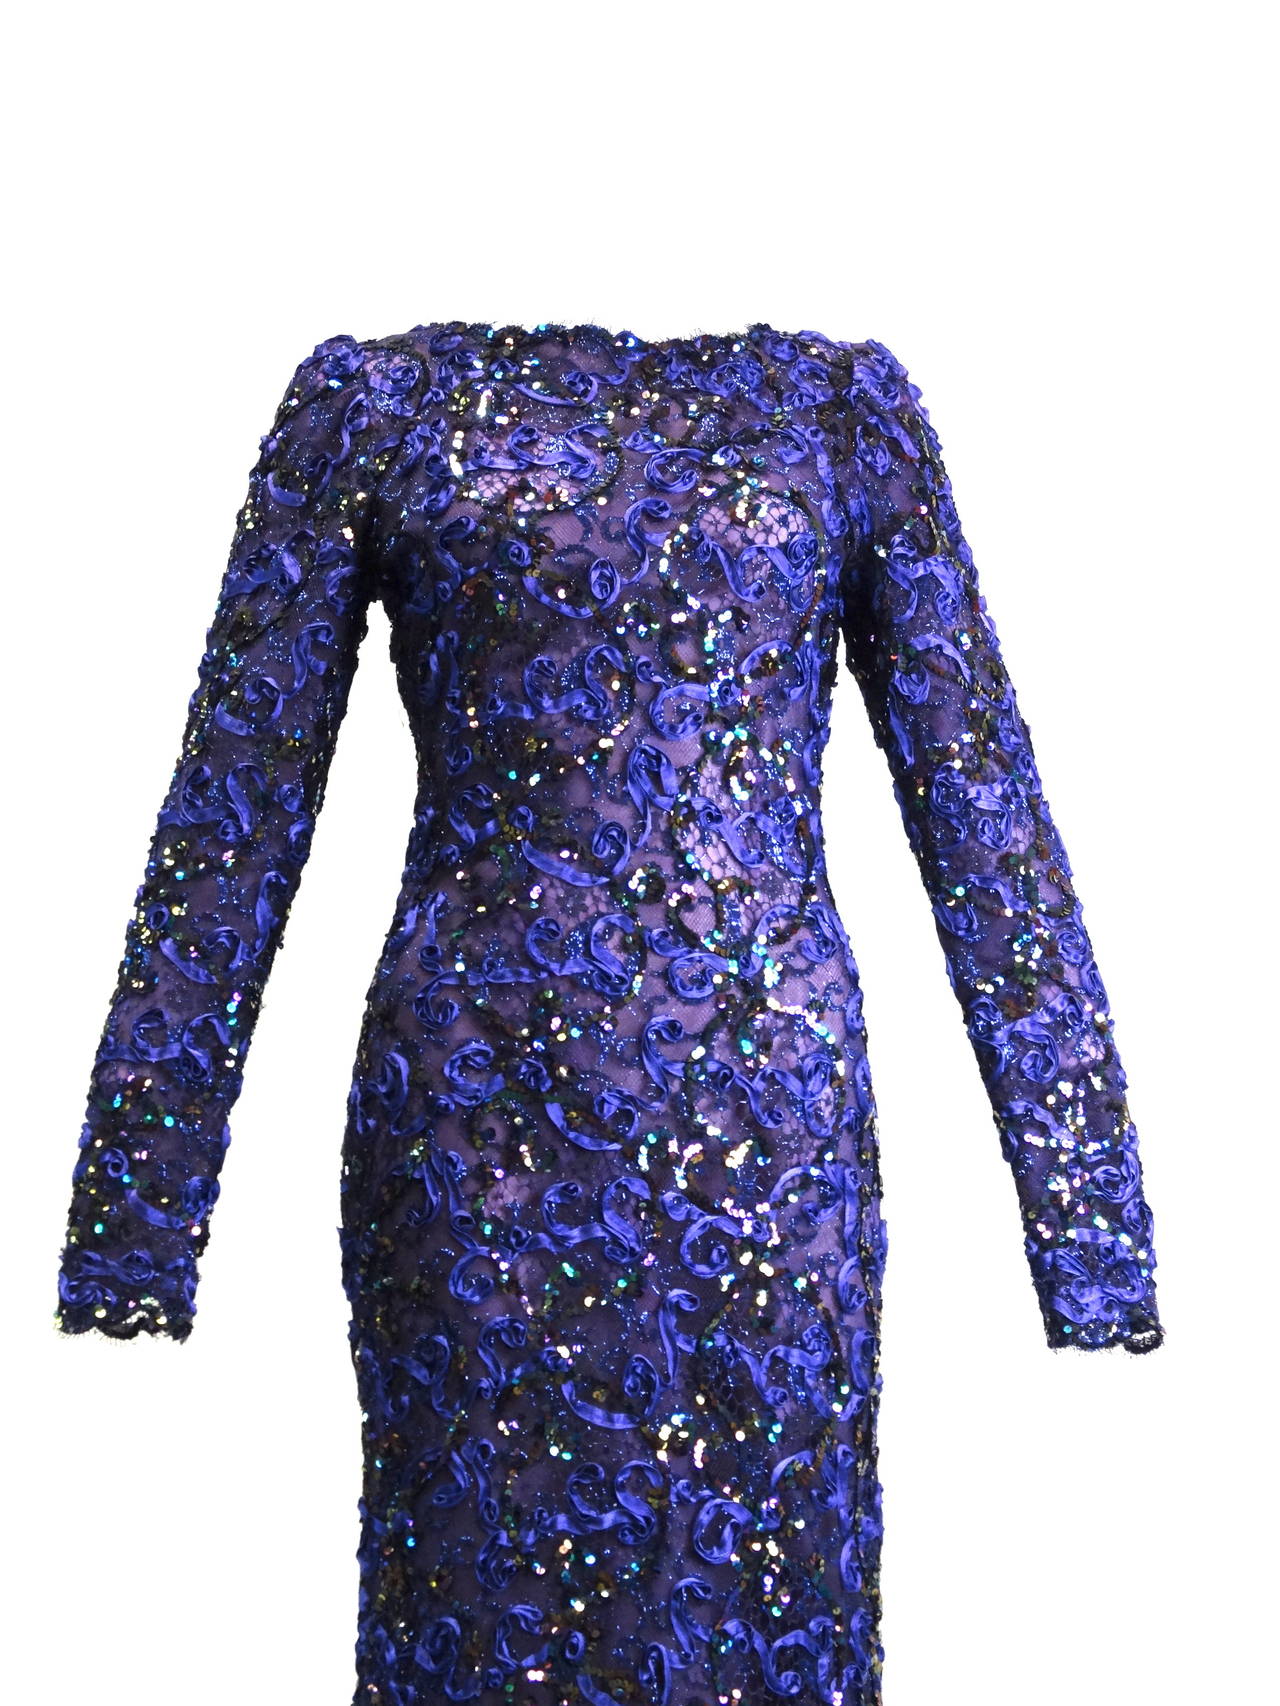 This is a stunning Oscar De La Renta jeweled tone purple and lace Sequin Gown - Circa 1980's for Capriccio, this Gown is a size 8 and is covered in deep purple and iridescent sequins. Absolutly Stunning, please inquire with any further